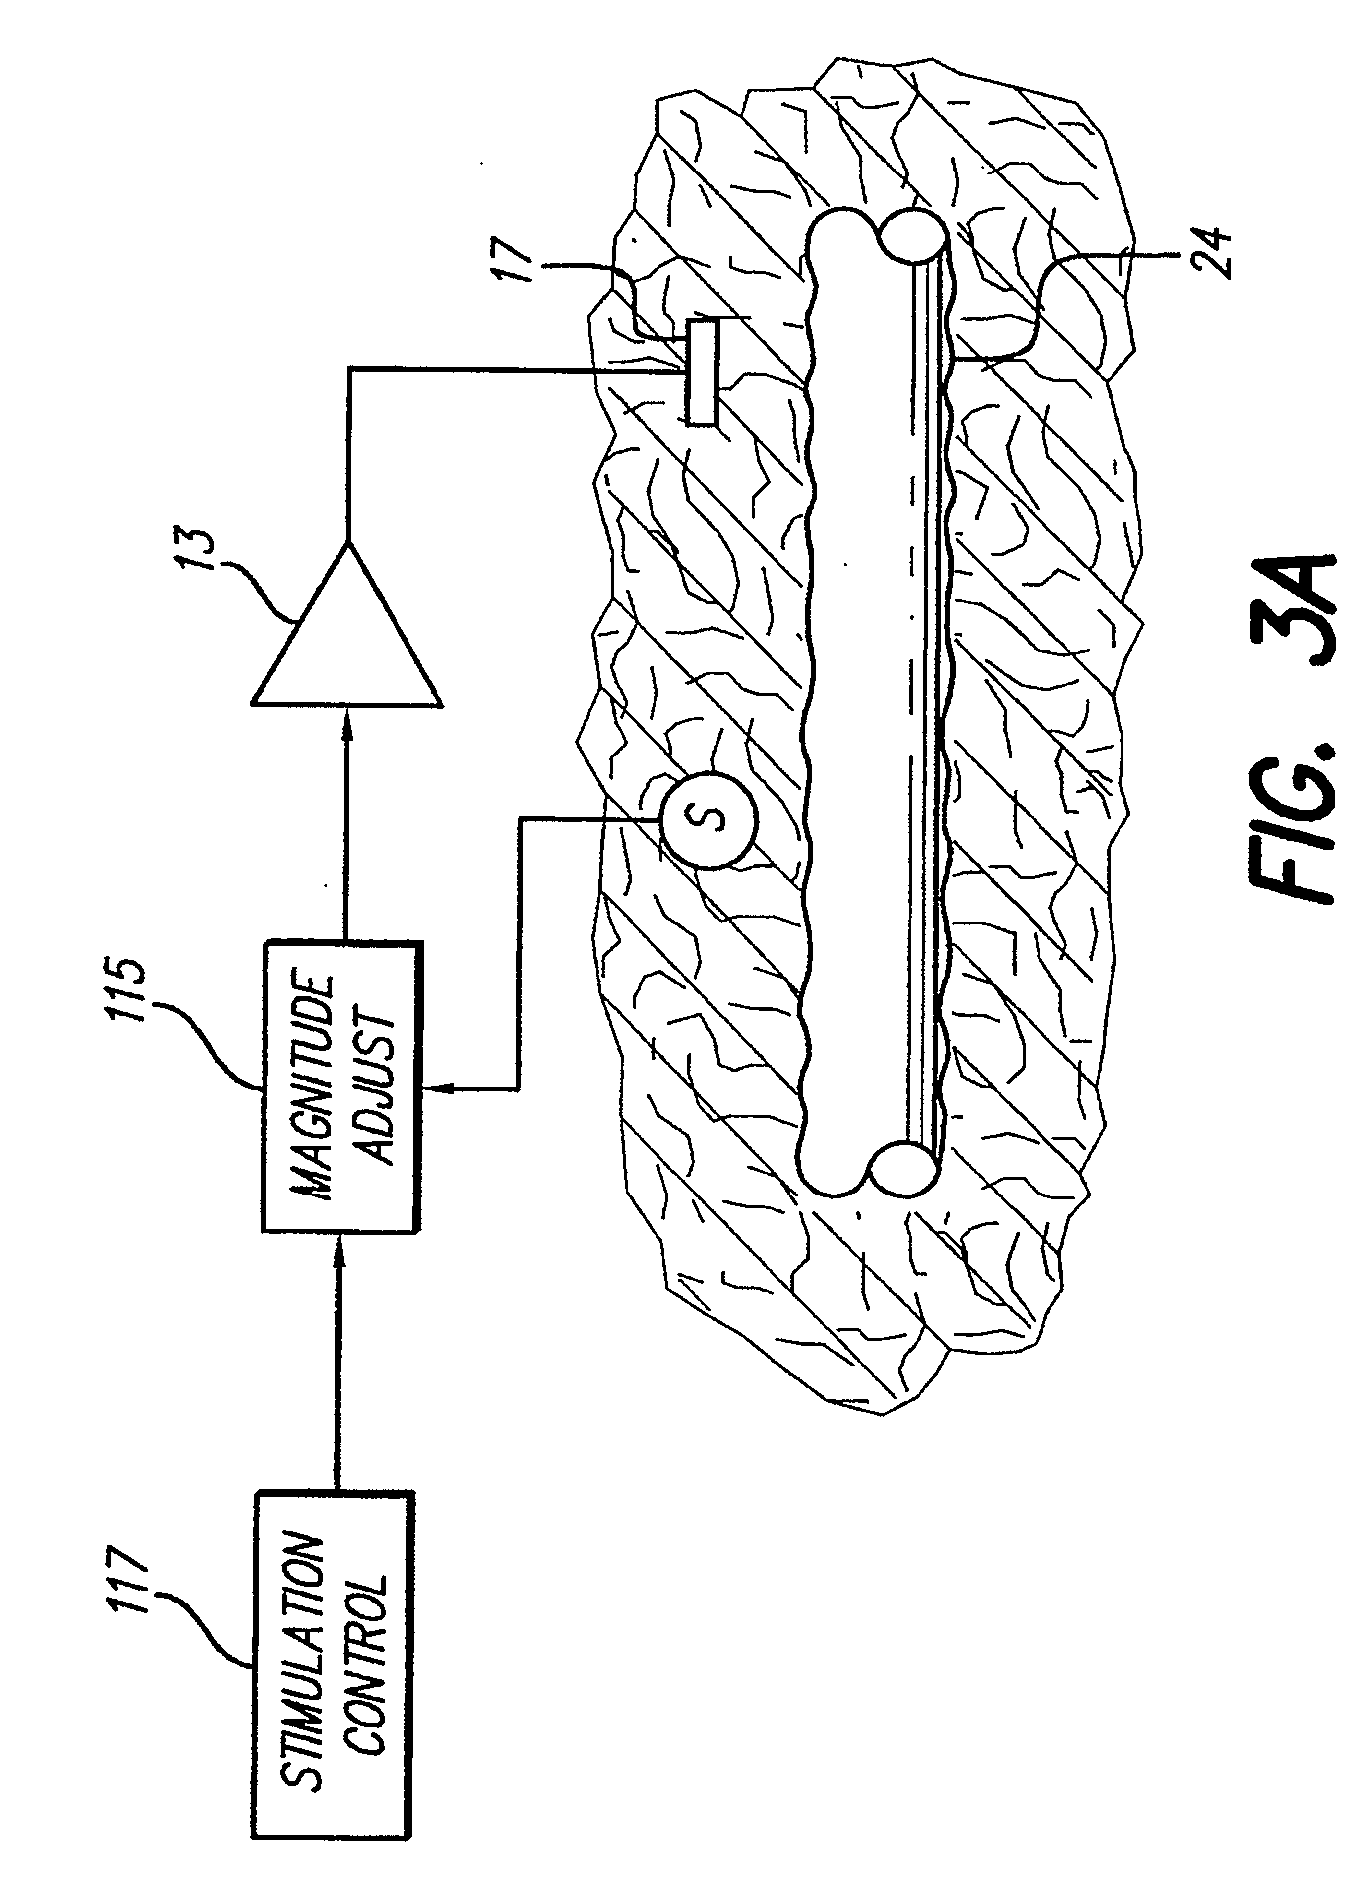 Neural stimulation system providing auto adjustment of stimulus output as a function of sensed impedance